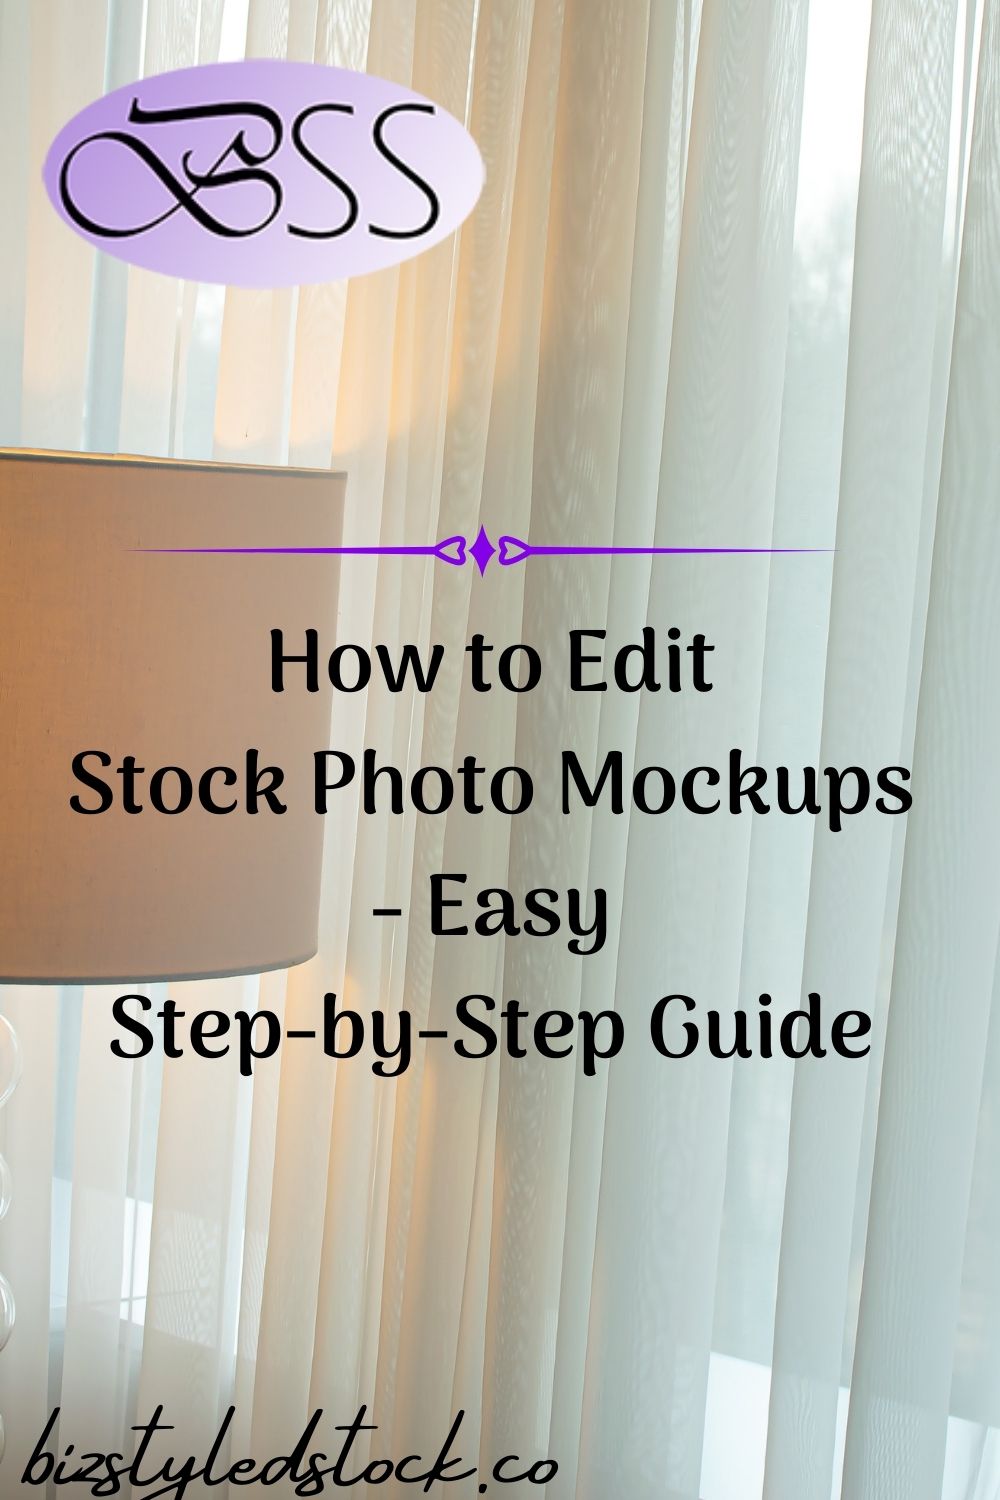 How to Edit Stock Photo Mockups - Easy Step-by-Step Guide #stockphotosmockups